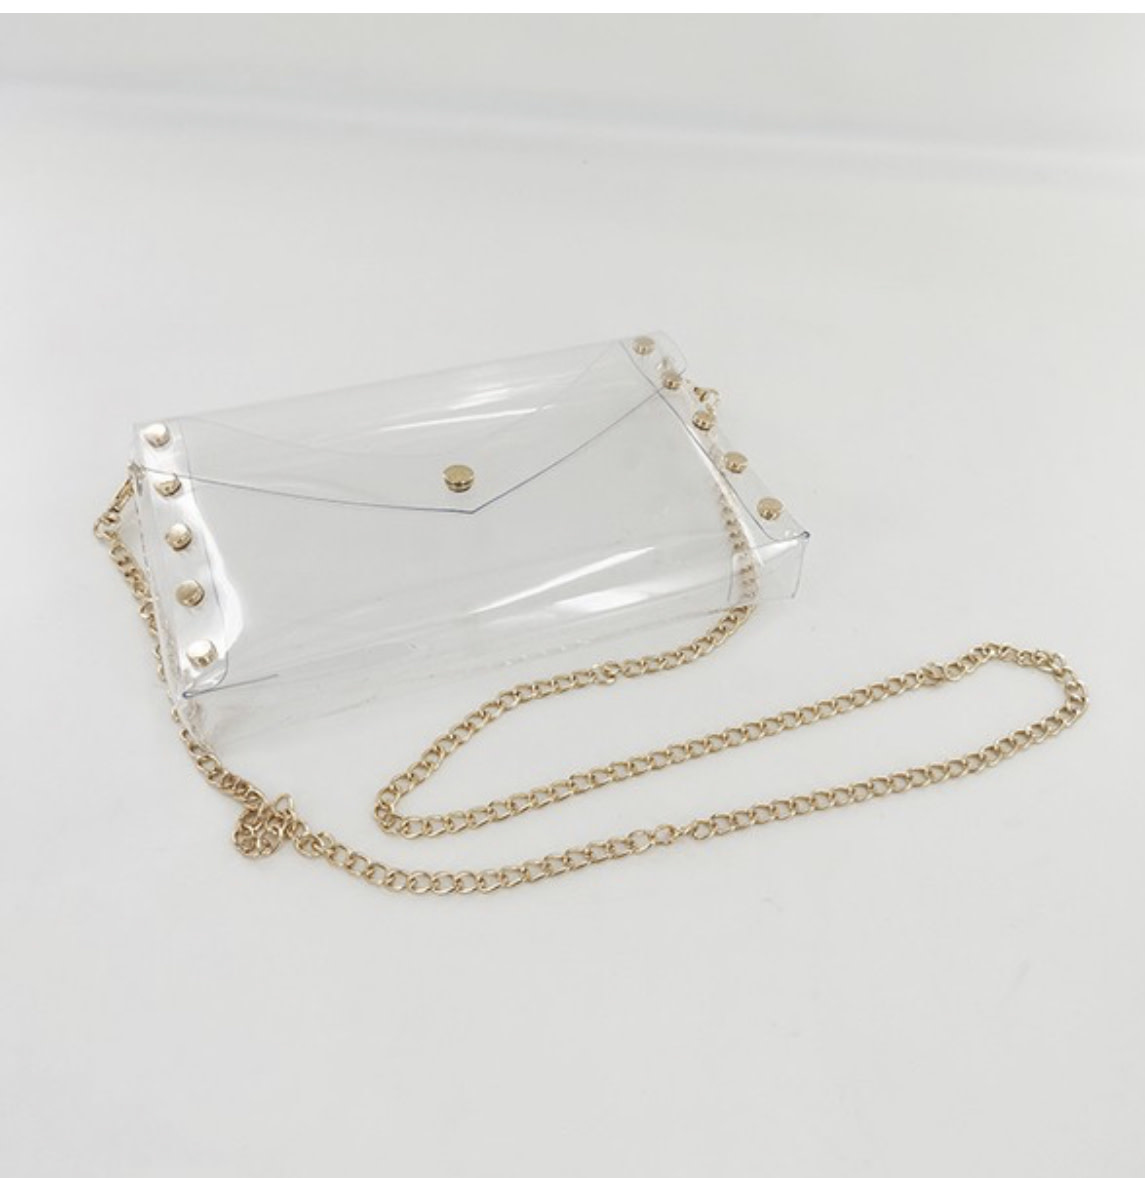 COOPER CROSSBODY GOLD CLEAR PURSE – Packed Party